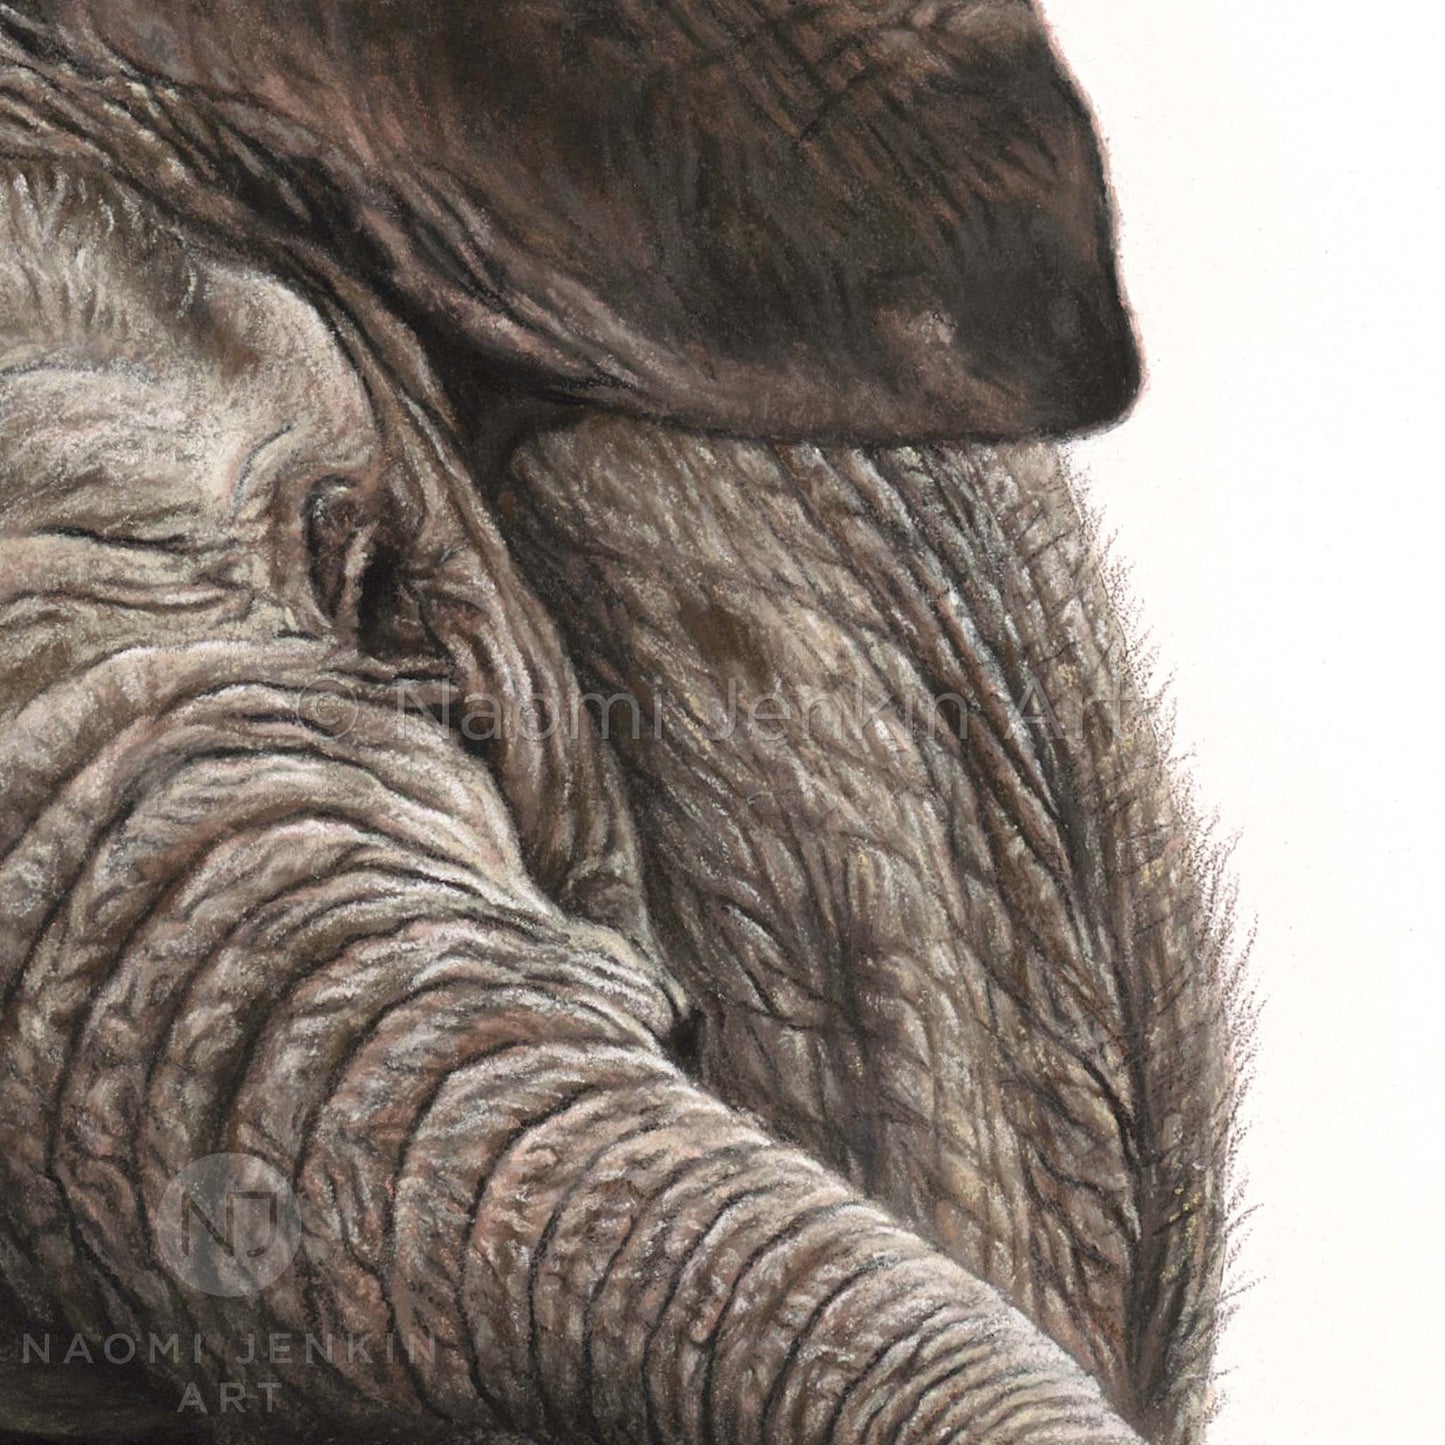 Close up elephant face and trunk drawing from the print 'Shake It Off' by Naomi Jenkin